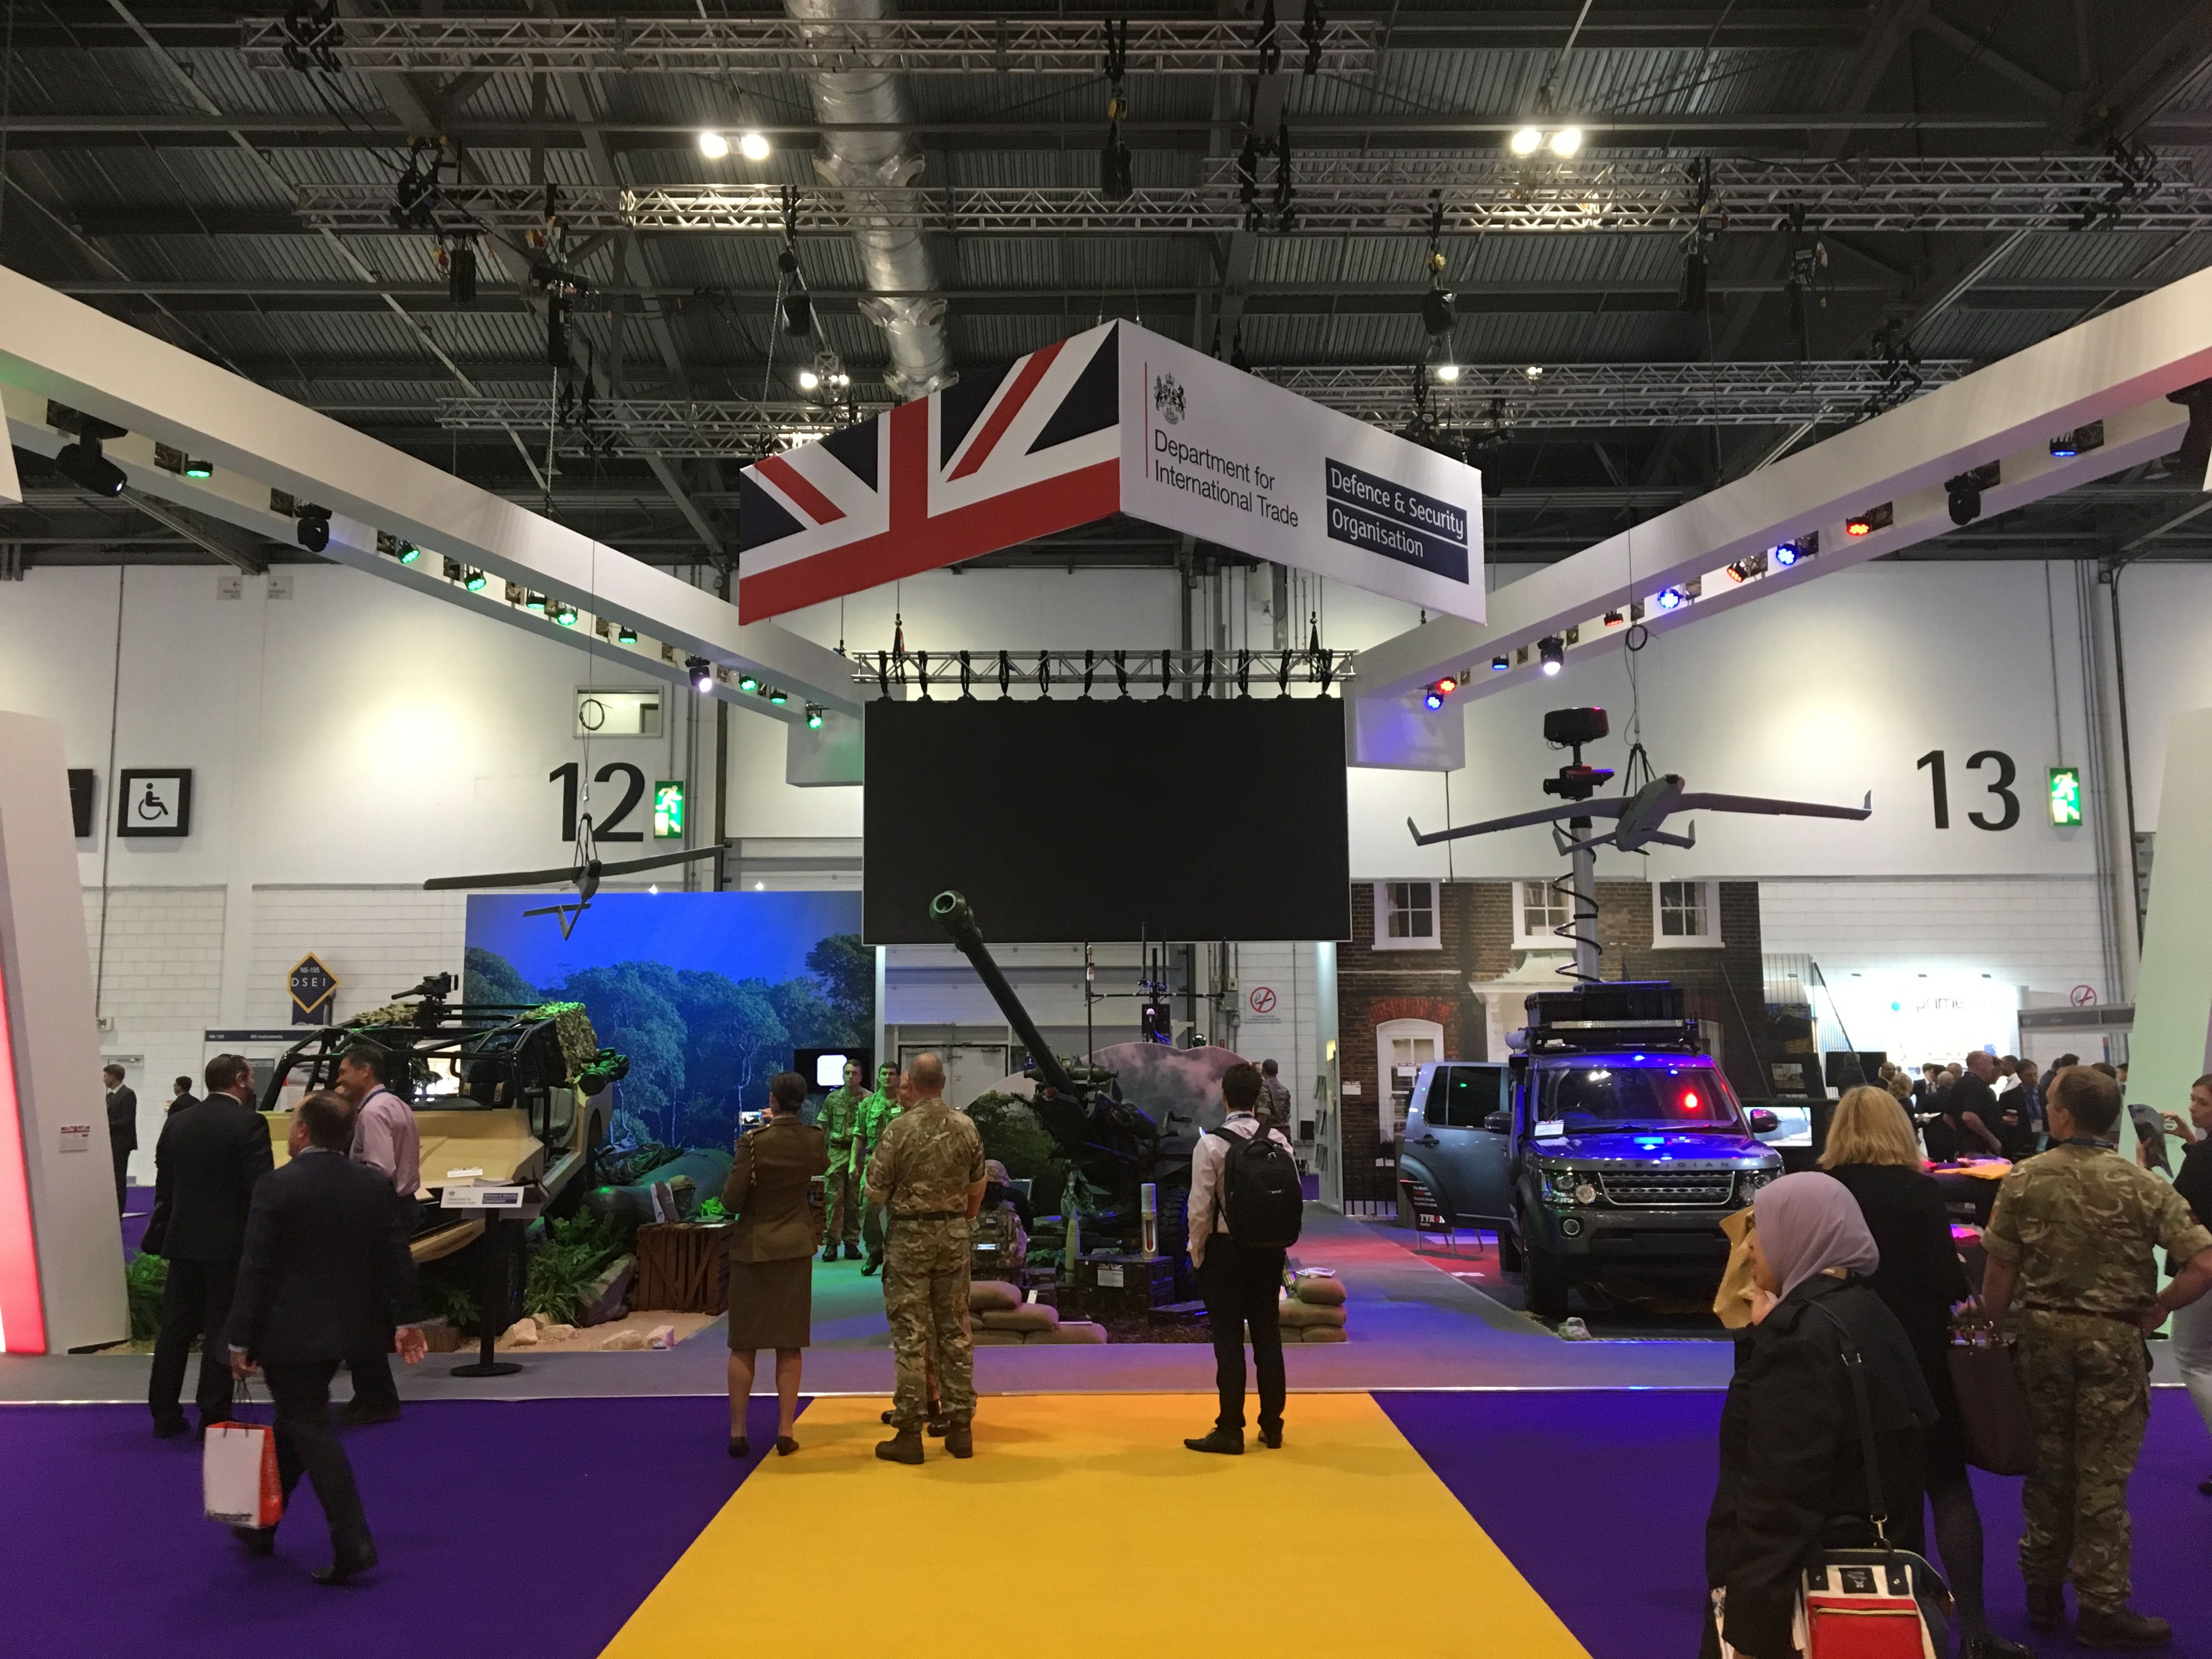 The British quarter at the world's largest arms fair, DSEI in London. The Defence & Security Organisation, a taxpayer funded organ of the UK government, has its logo raised high - it ploughs significant sums into promoting British arms companies exports around the world, including organising arms fairs. Image by Matt Kennard. United Kingdom, 2017. 